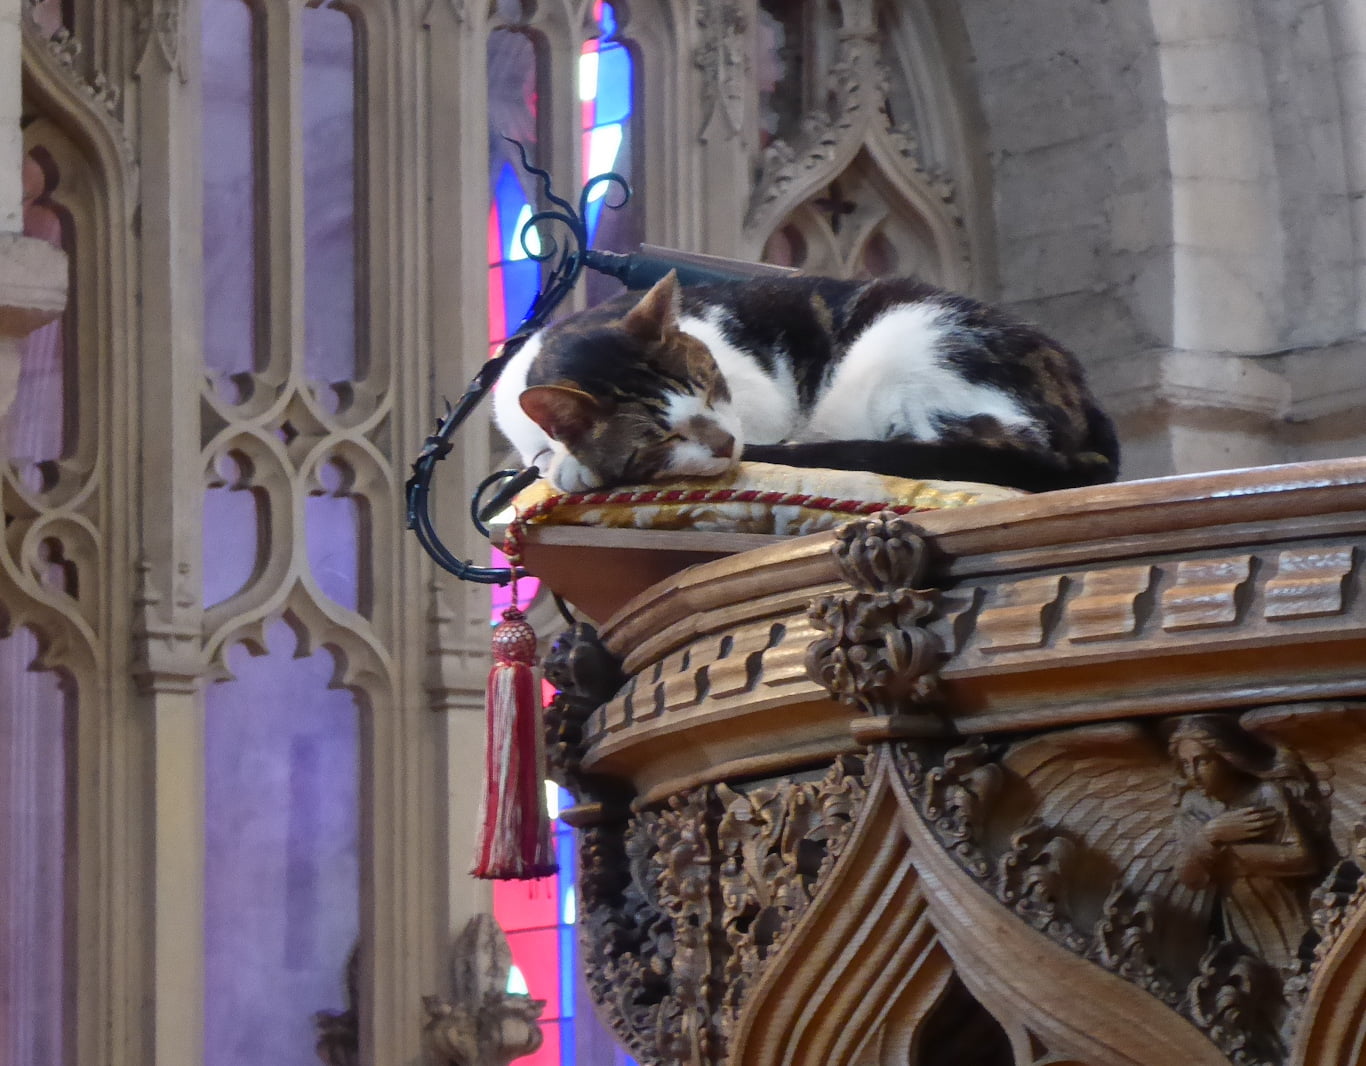 'Budge' Norwich Cathedral's cat having a snooze in the pulpit